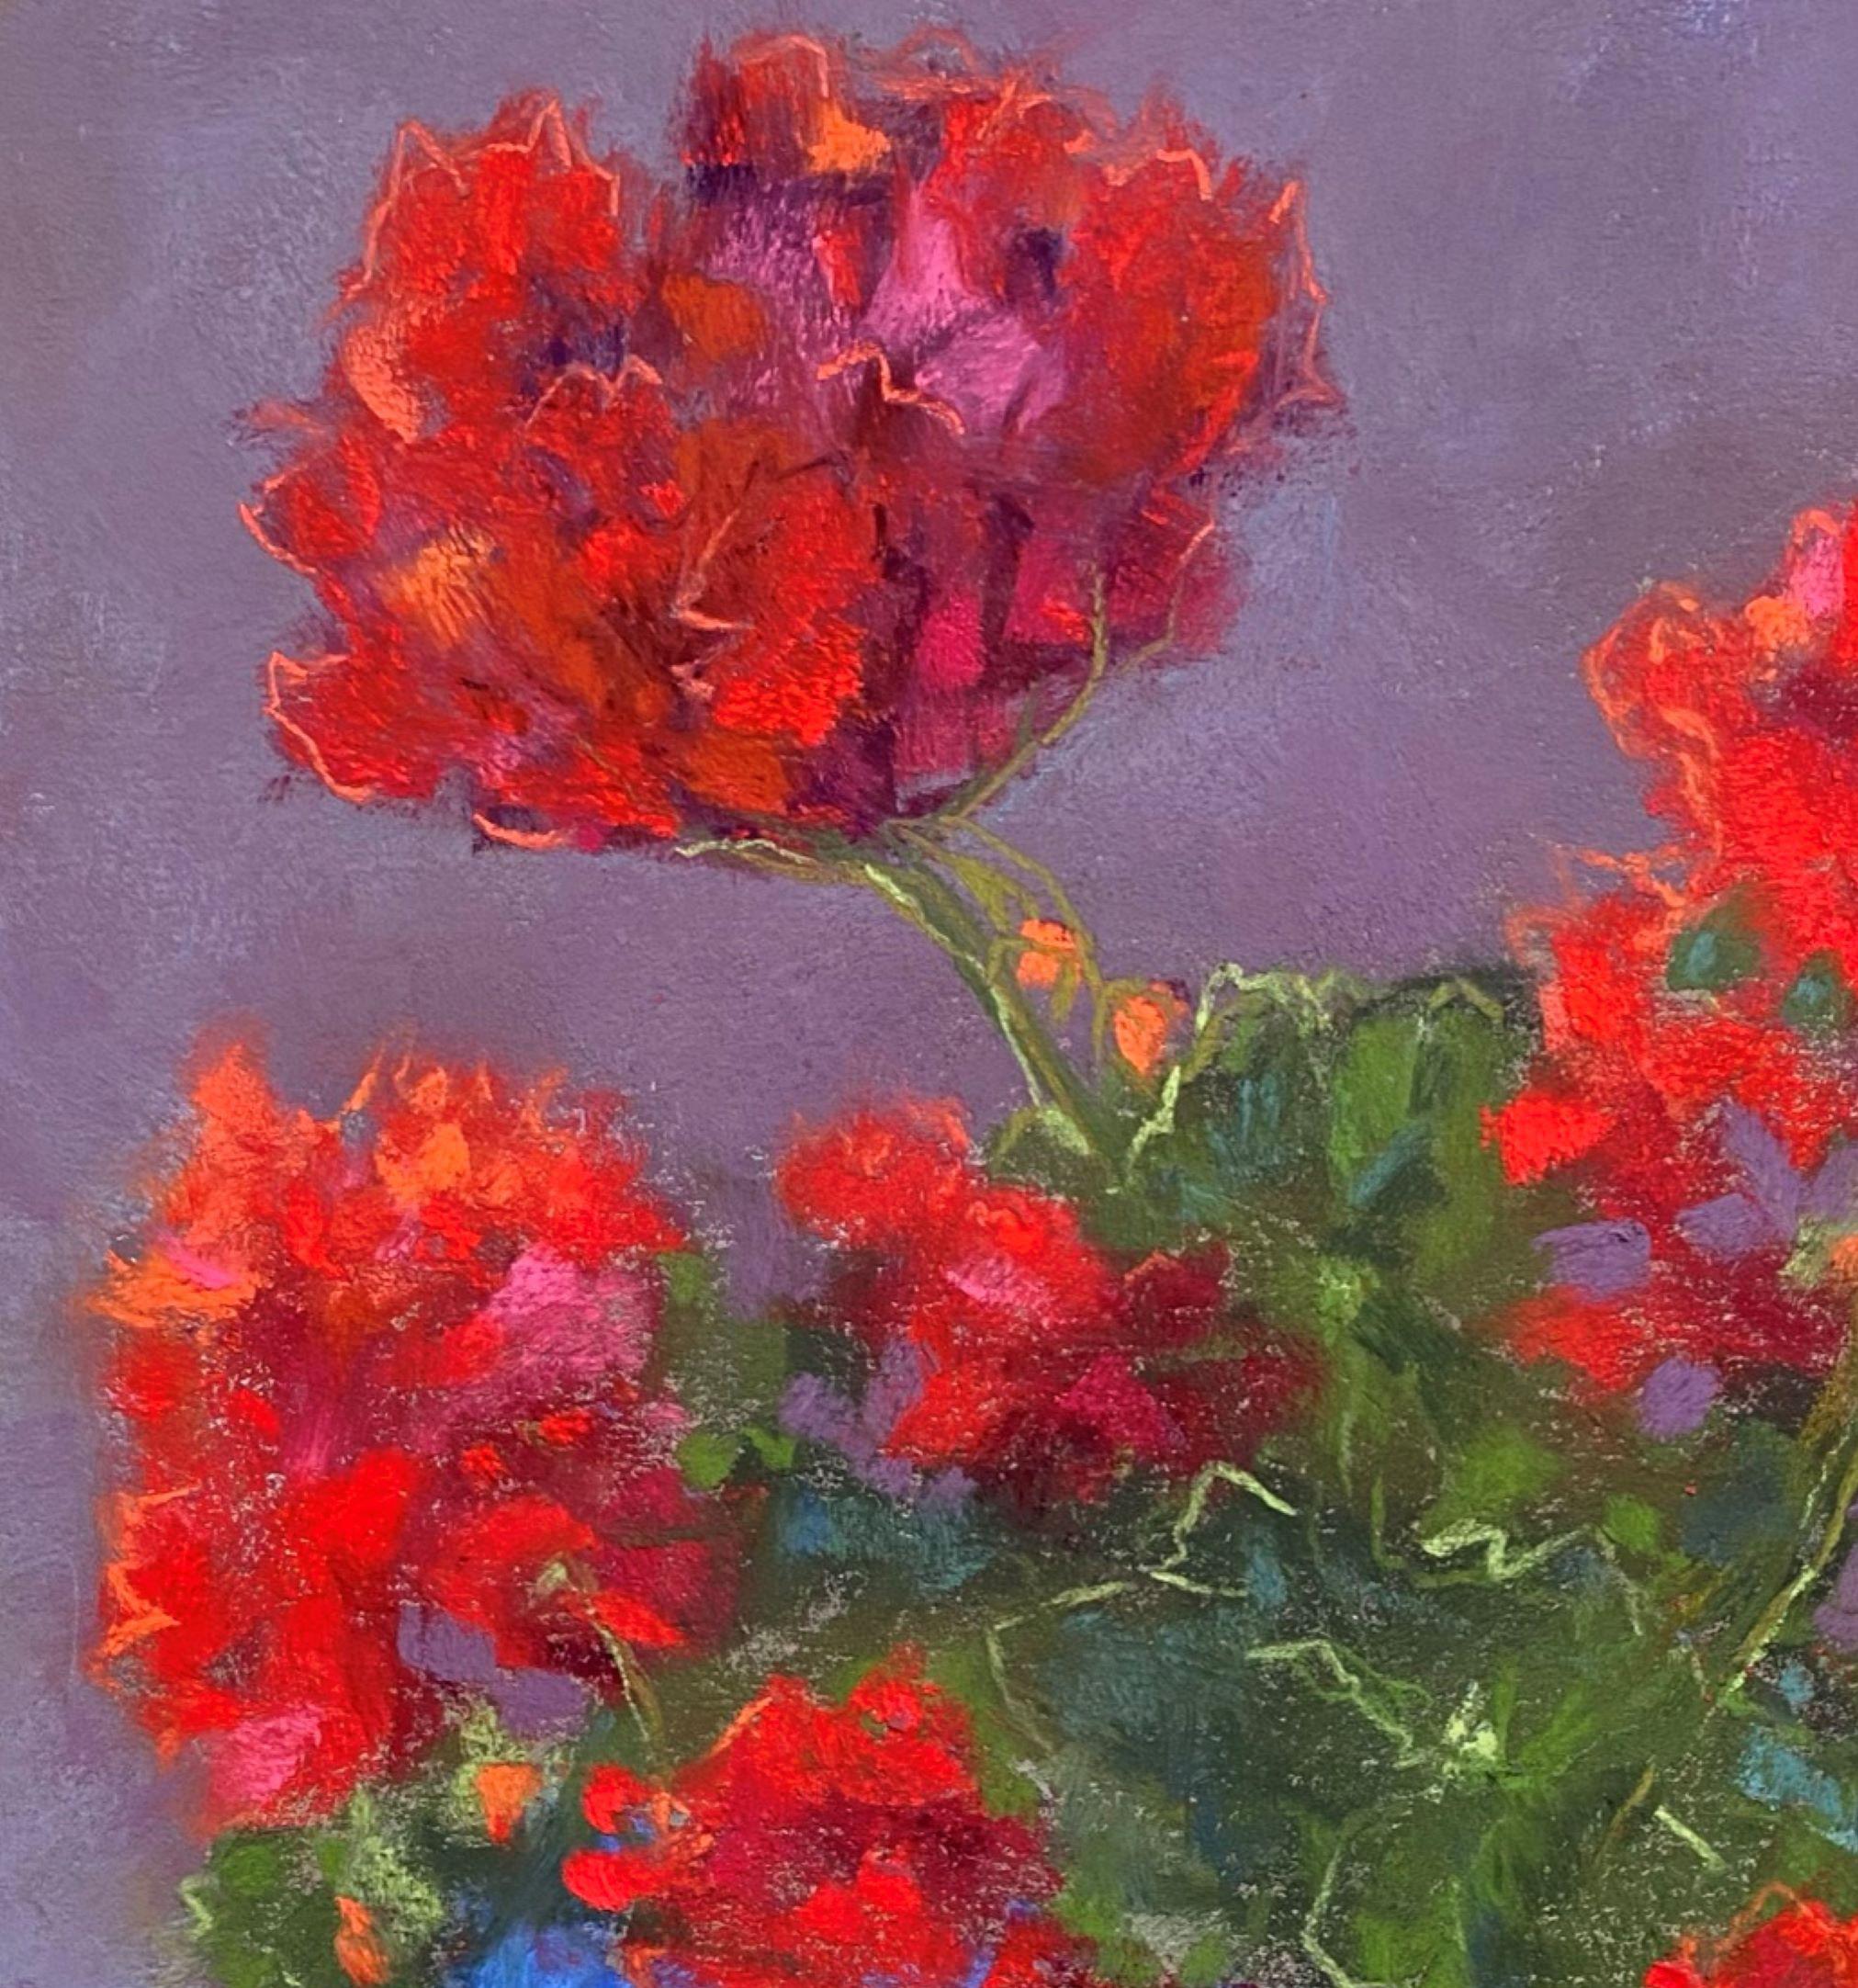 Cherry Red, Original Impressionist Floral Still Life Painting
12